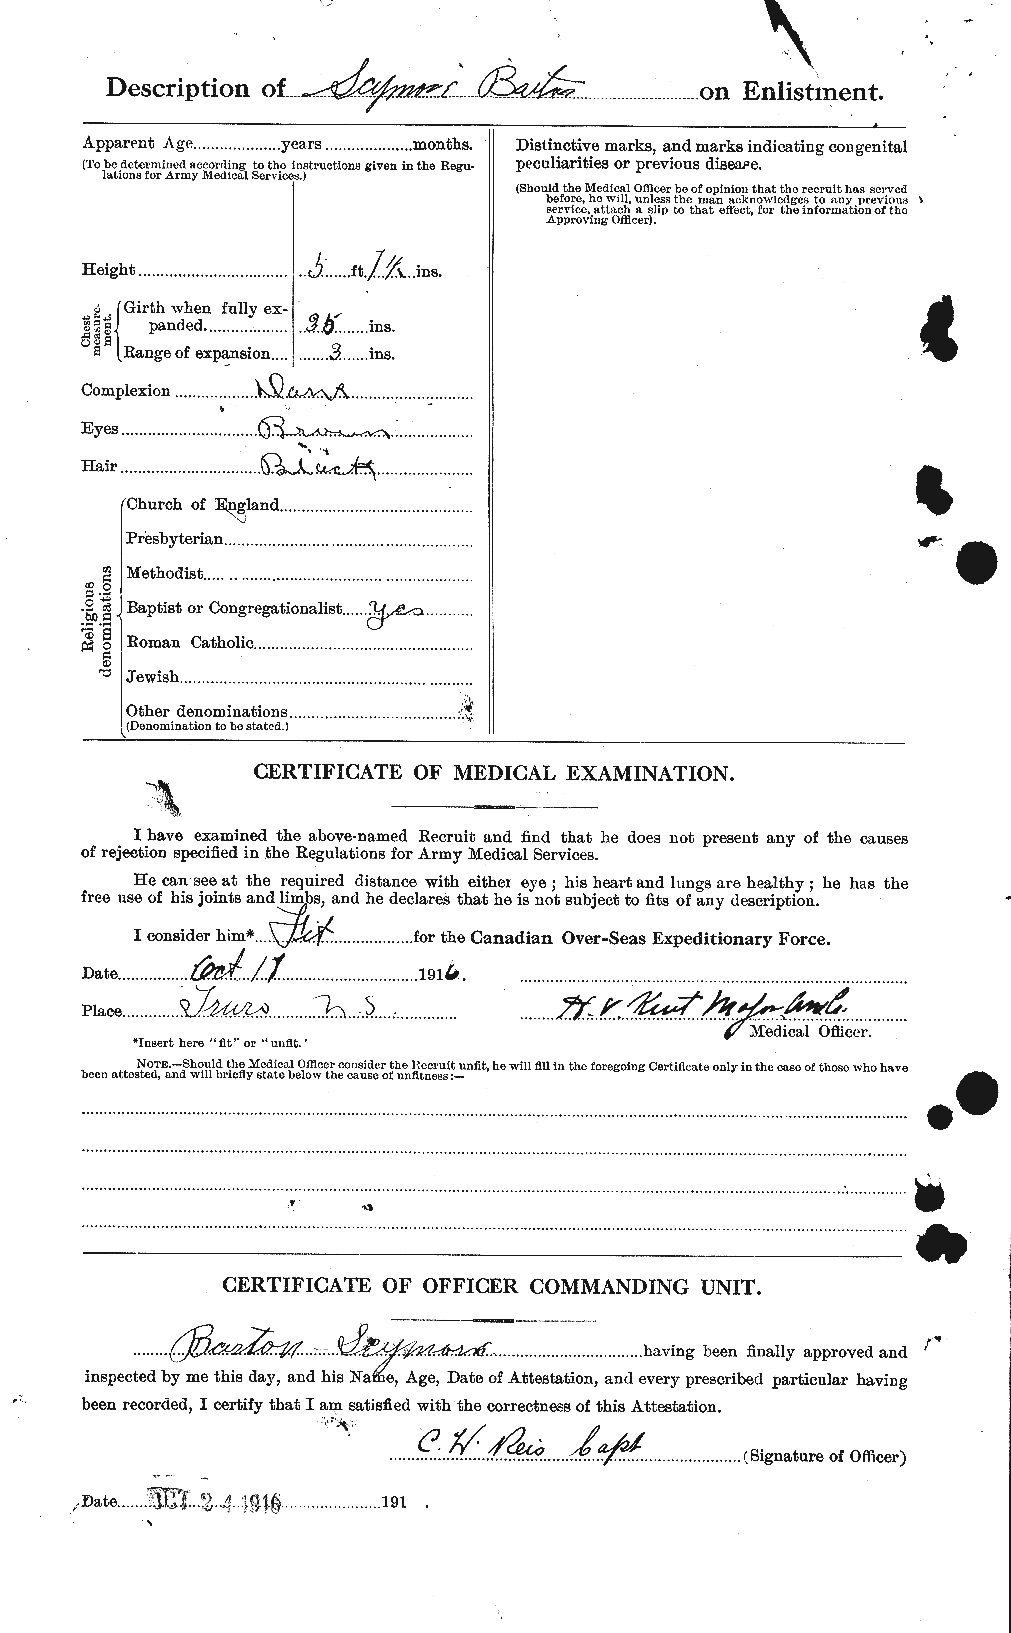 Personnel Records of the First World War - CEF 221336b